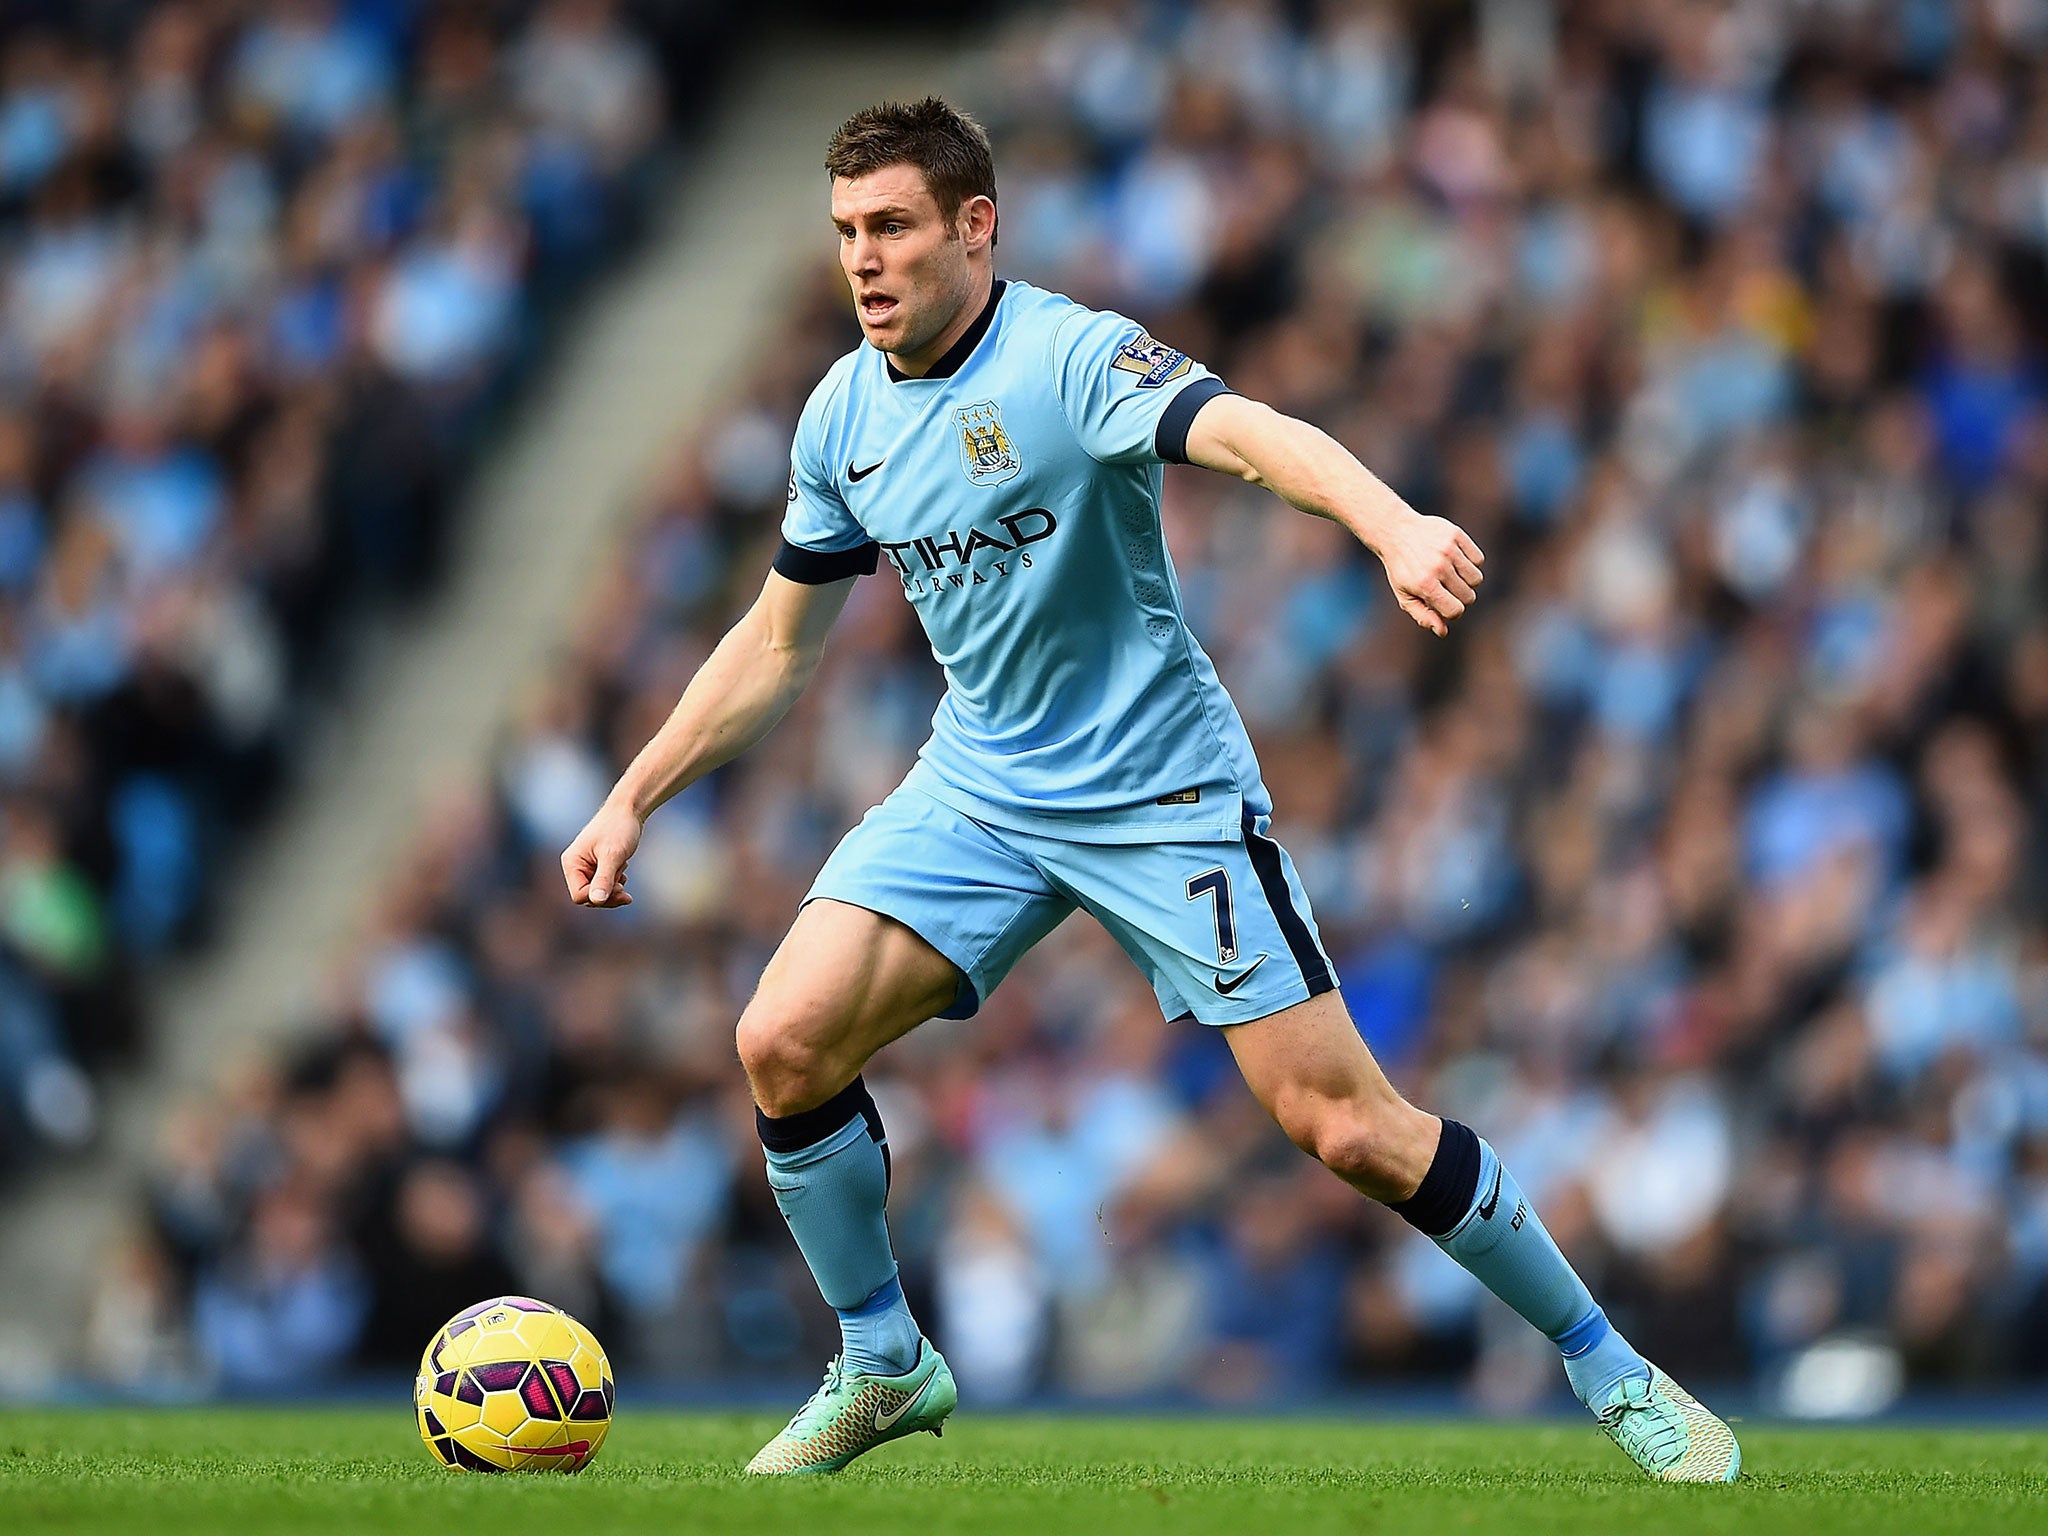 James Milner is out of contract at the end of the season